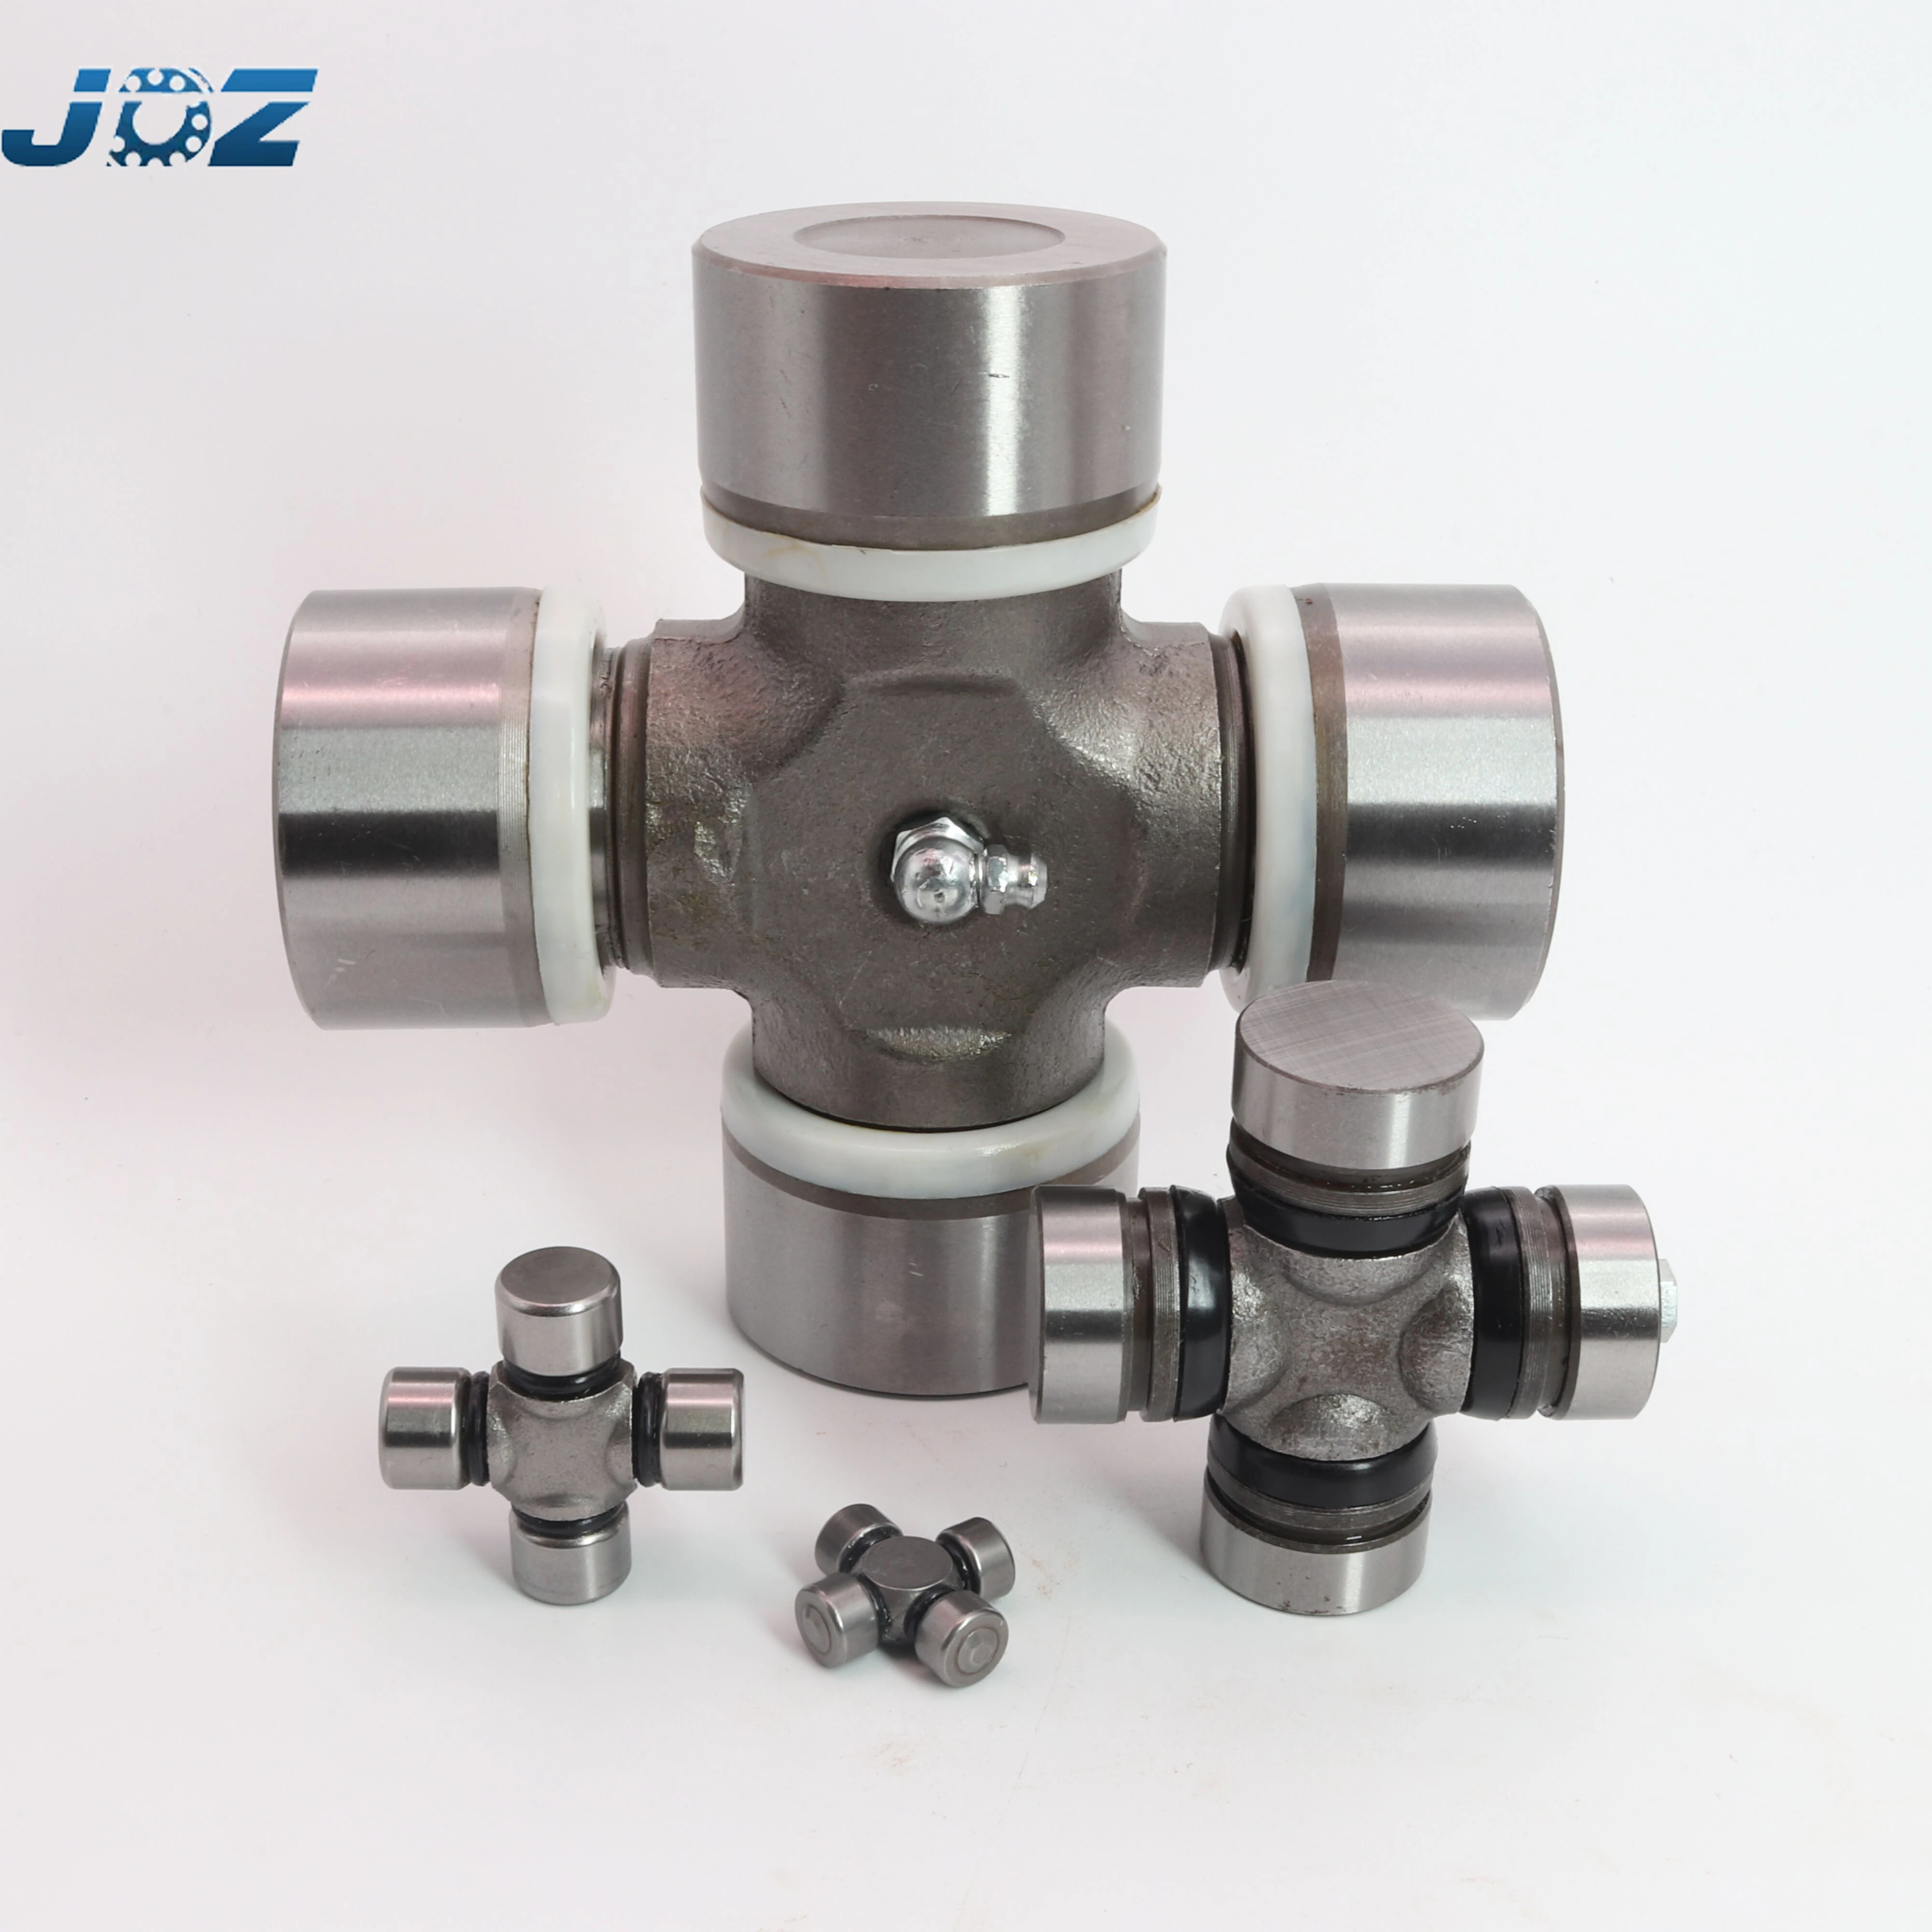 GUS2 Agricultural Machine parts Cross Joints GUS2 U-joints Universal joints